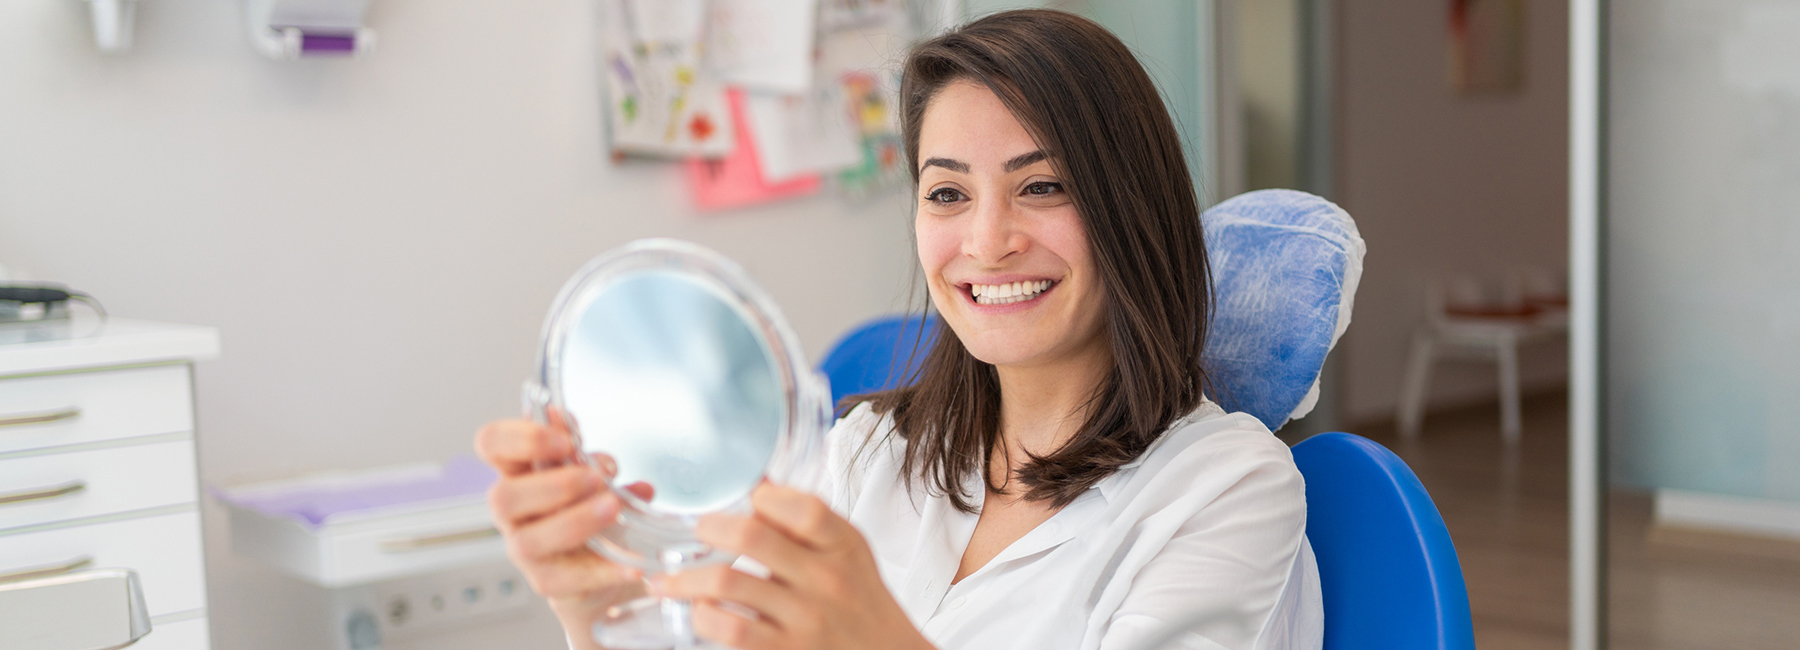 We provide teeth whitening services and treatments at our Waterdown dental office.